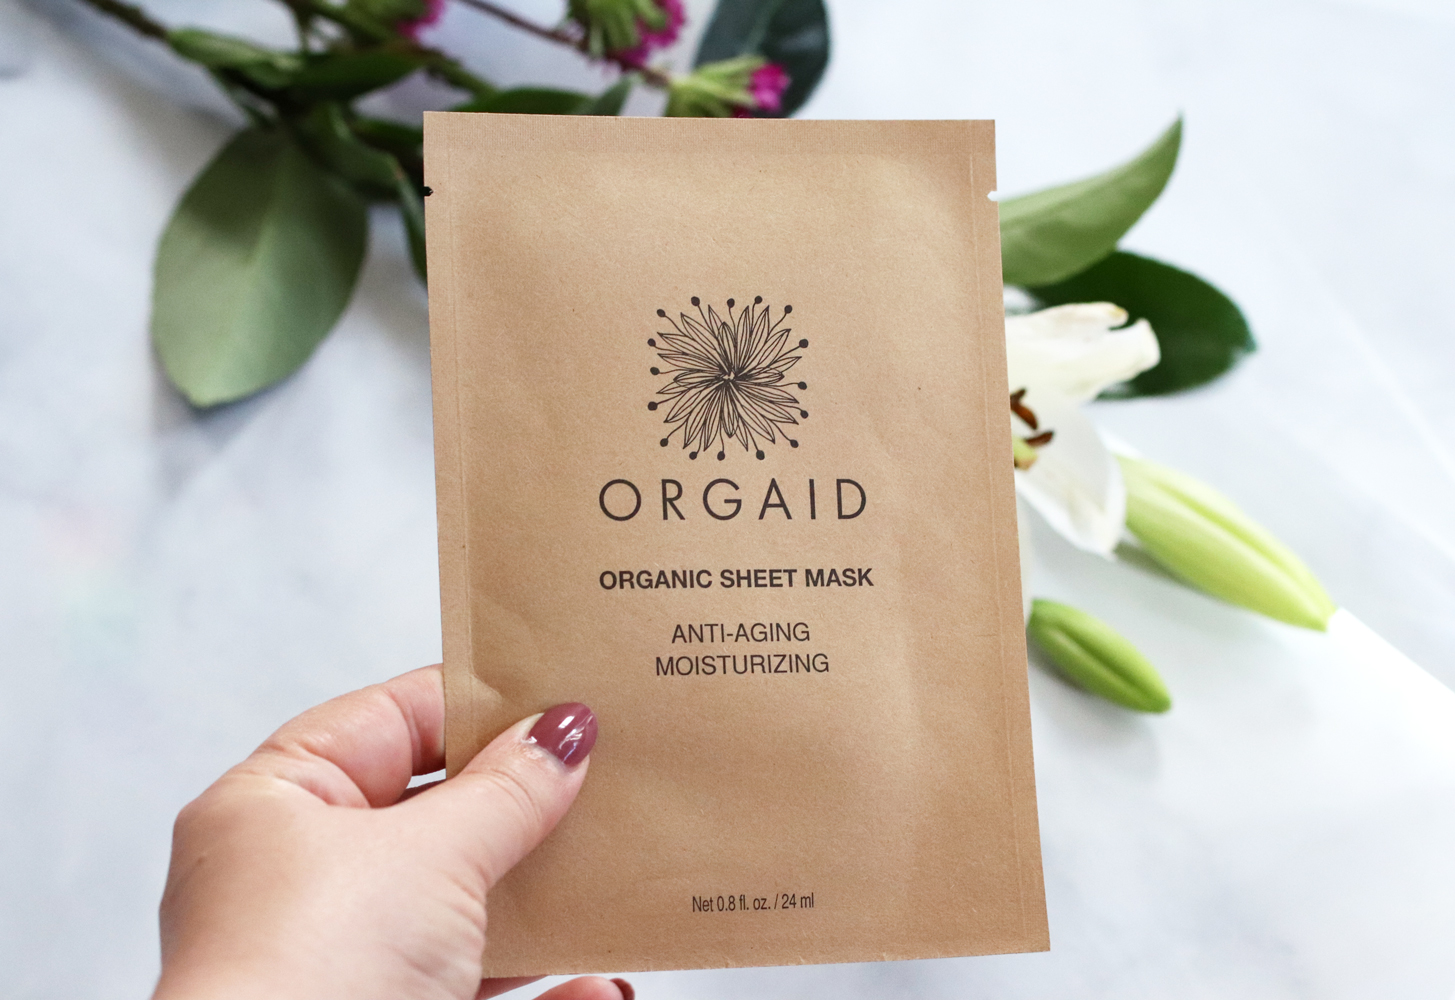 Clean beauty from Cynaglow - ORGAID organic sheet mask review